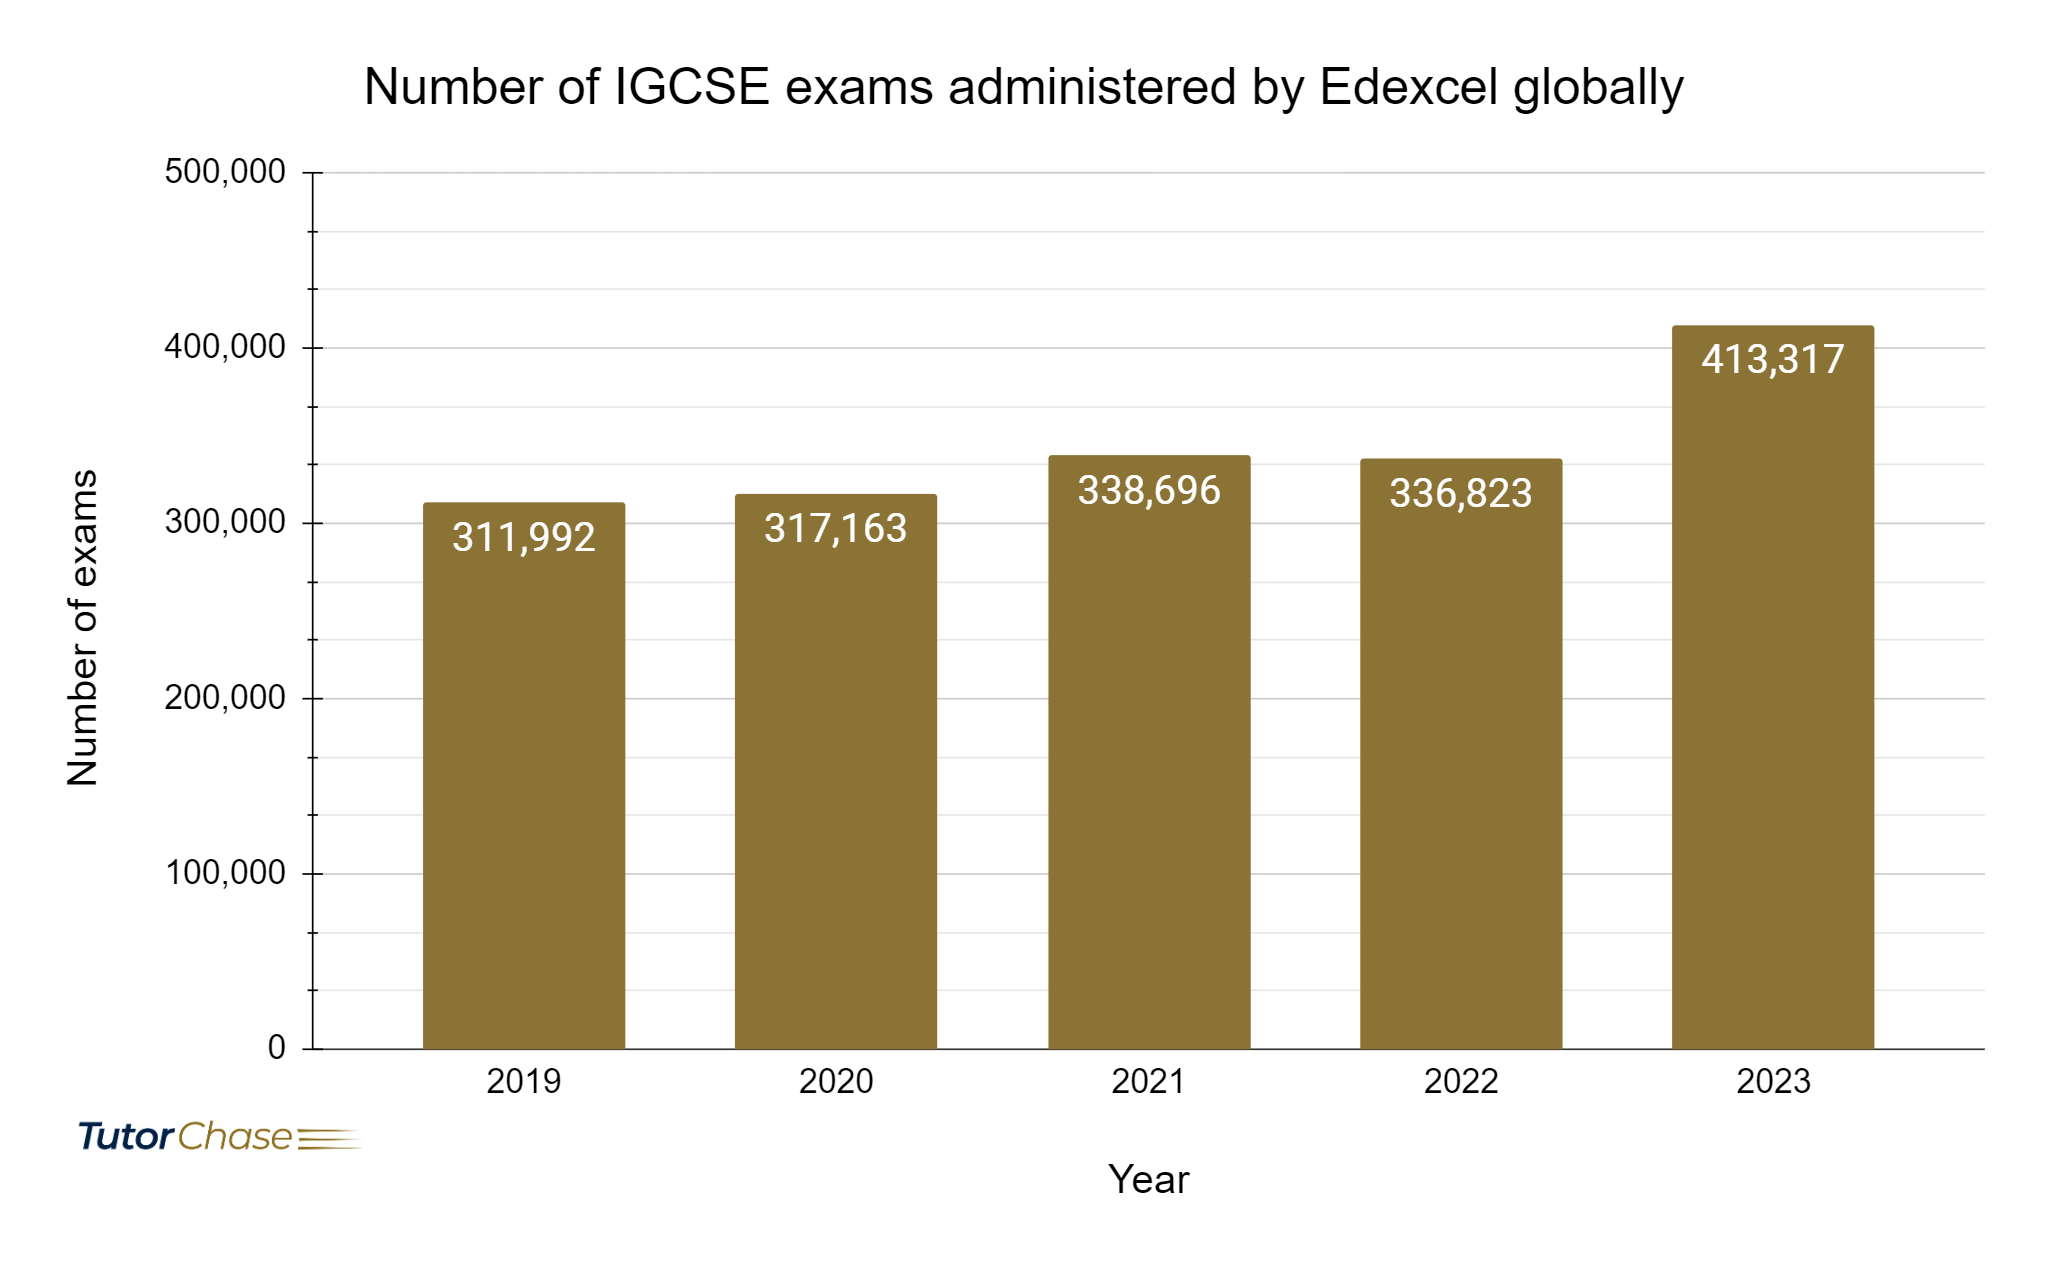 Number of IGCSE exams administered by Edexcel globally